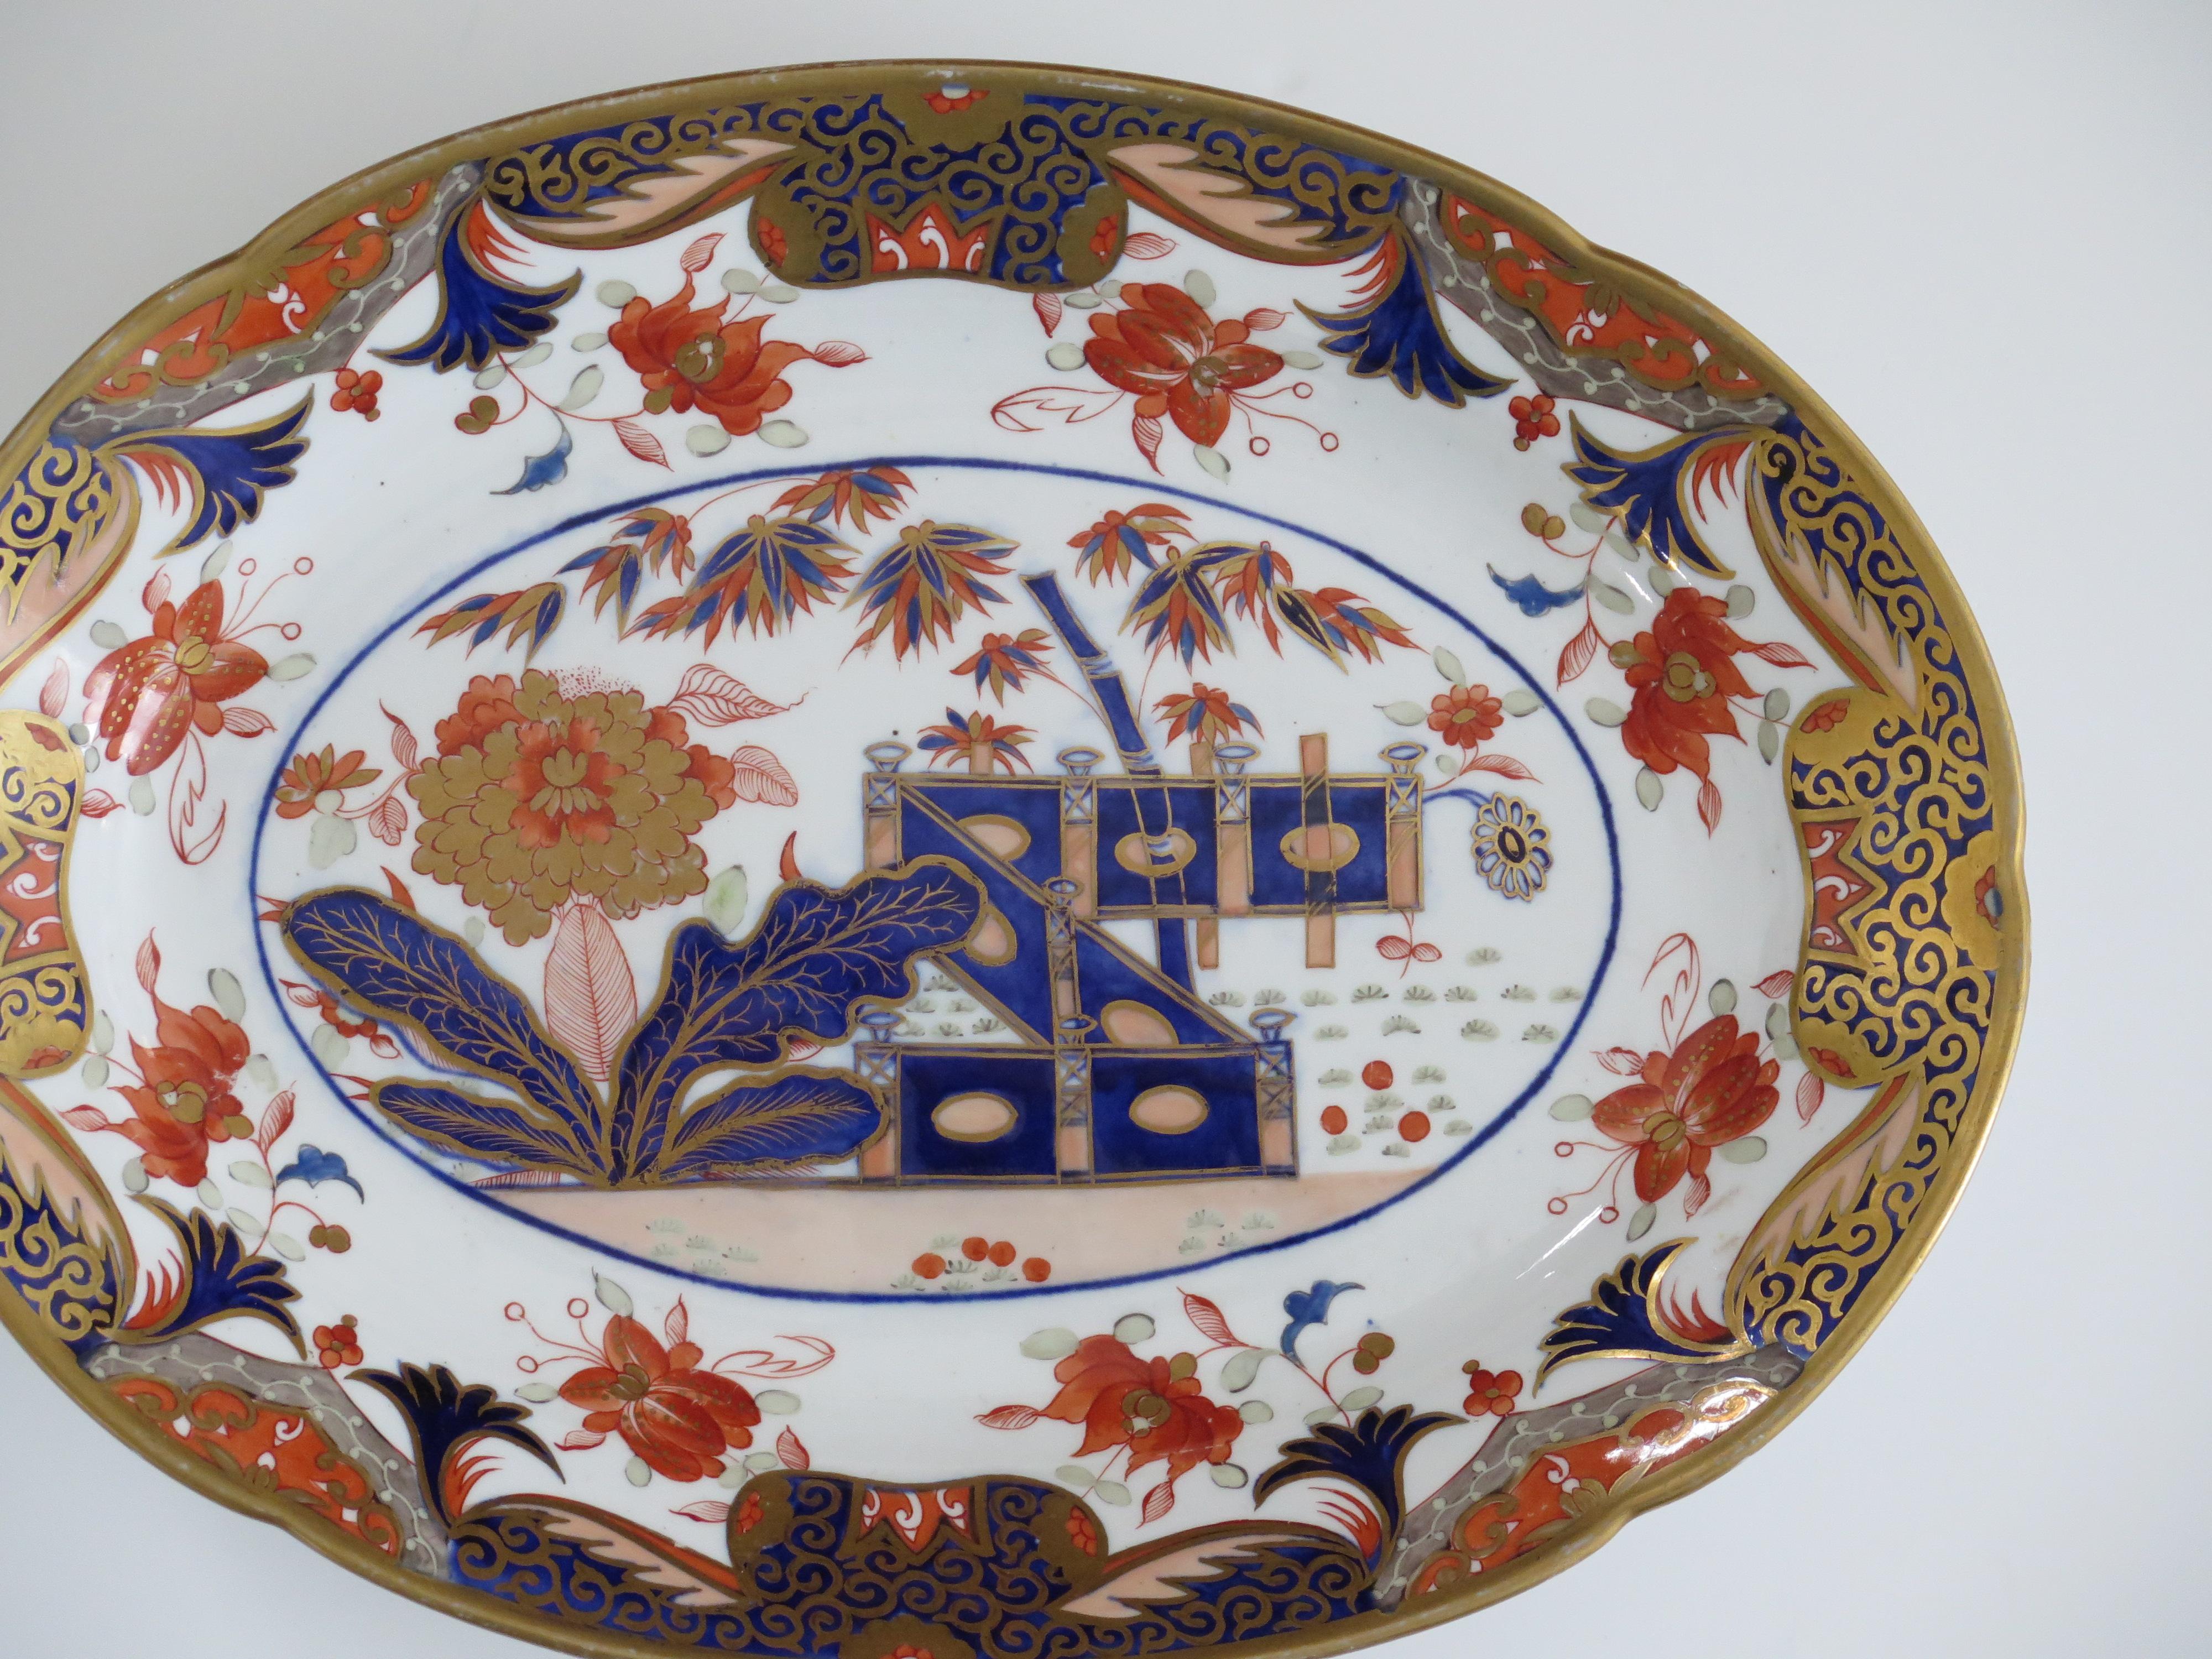 Hand-Painted Spode Porcelain Serving Platter or Dish Hand Painted & Gilded Ptn 967 circa 1810 For Sale